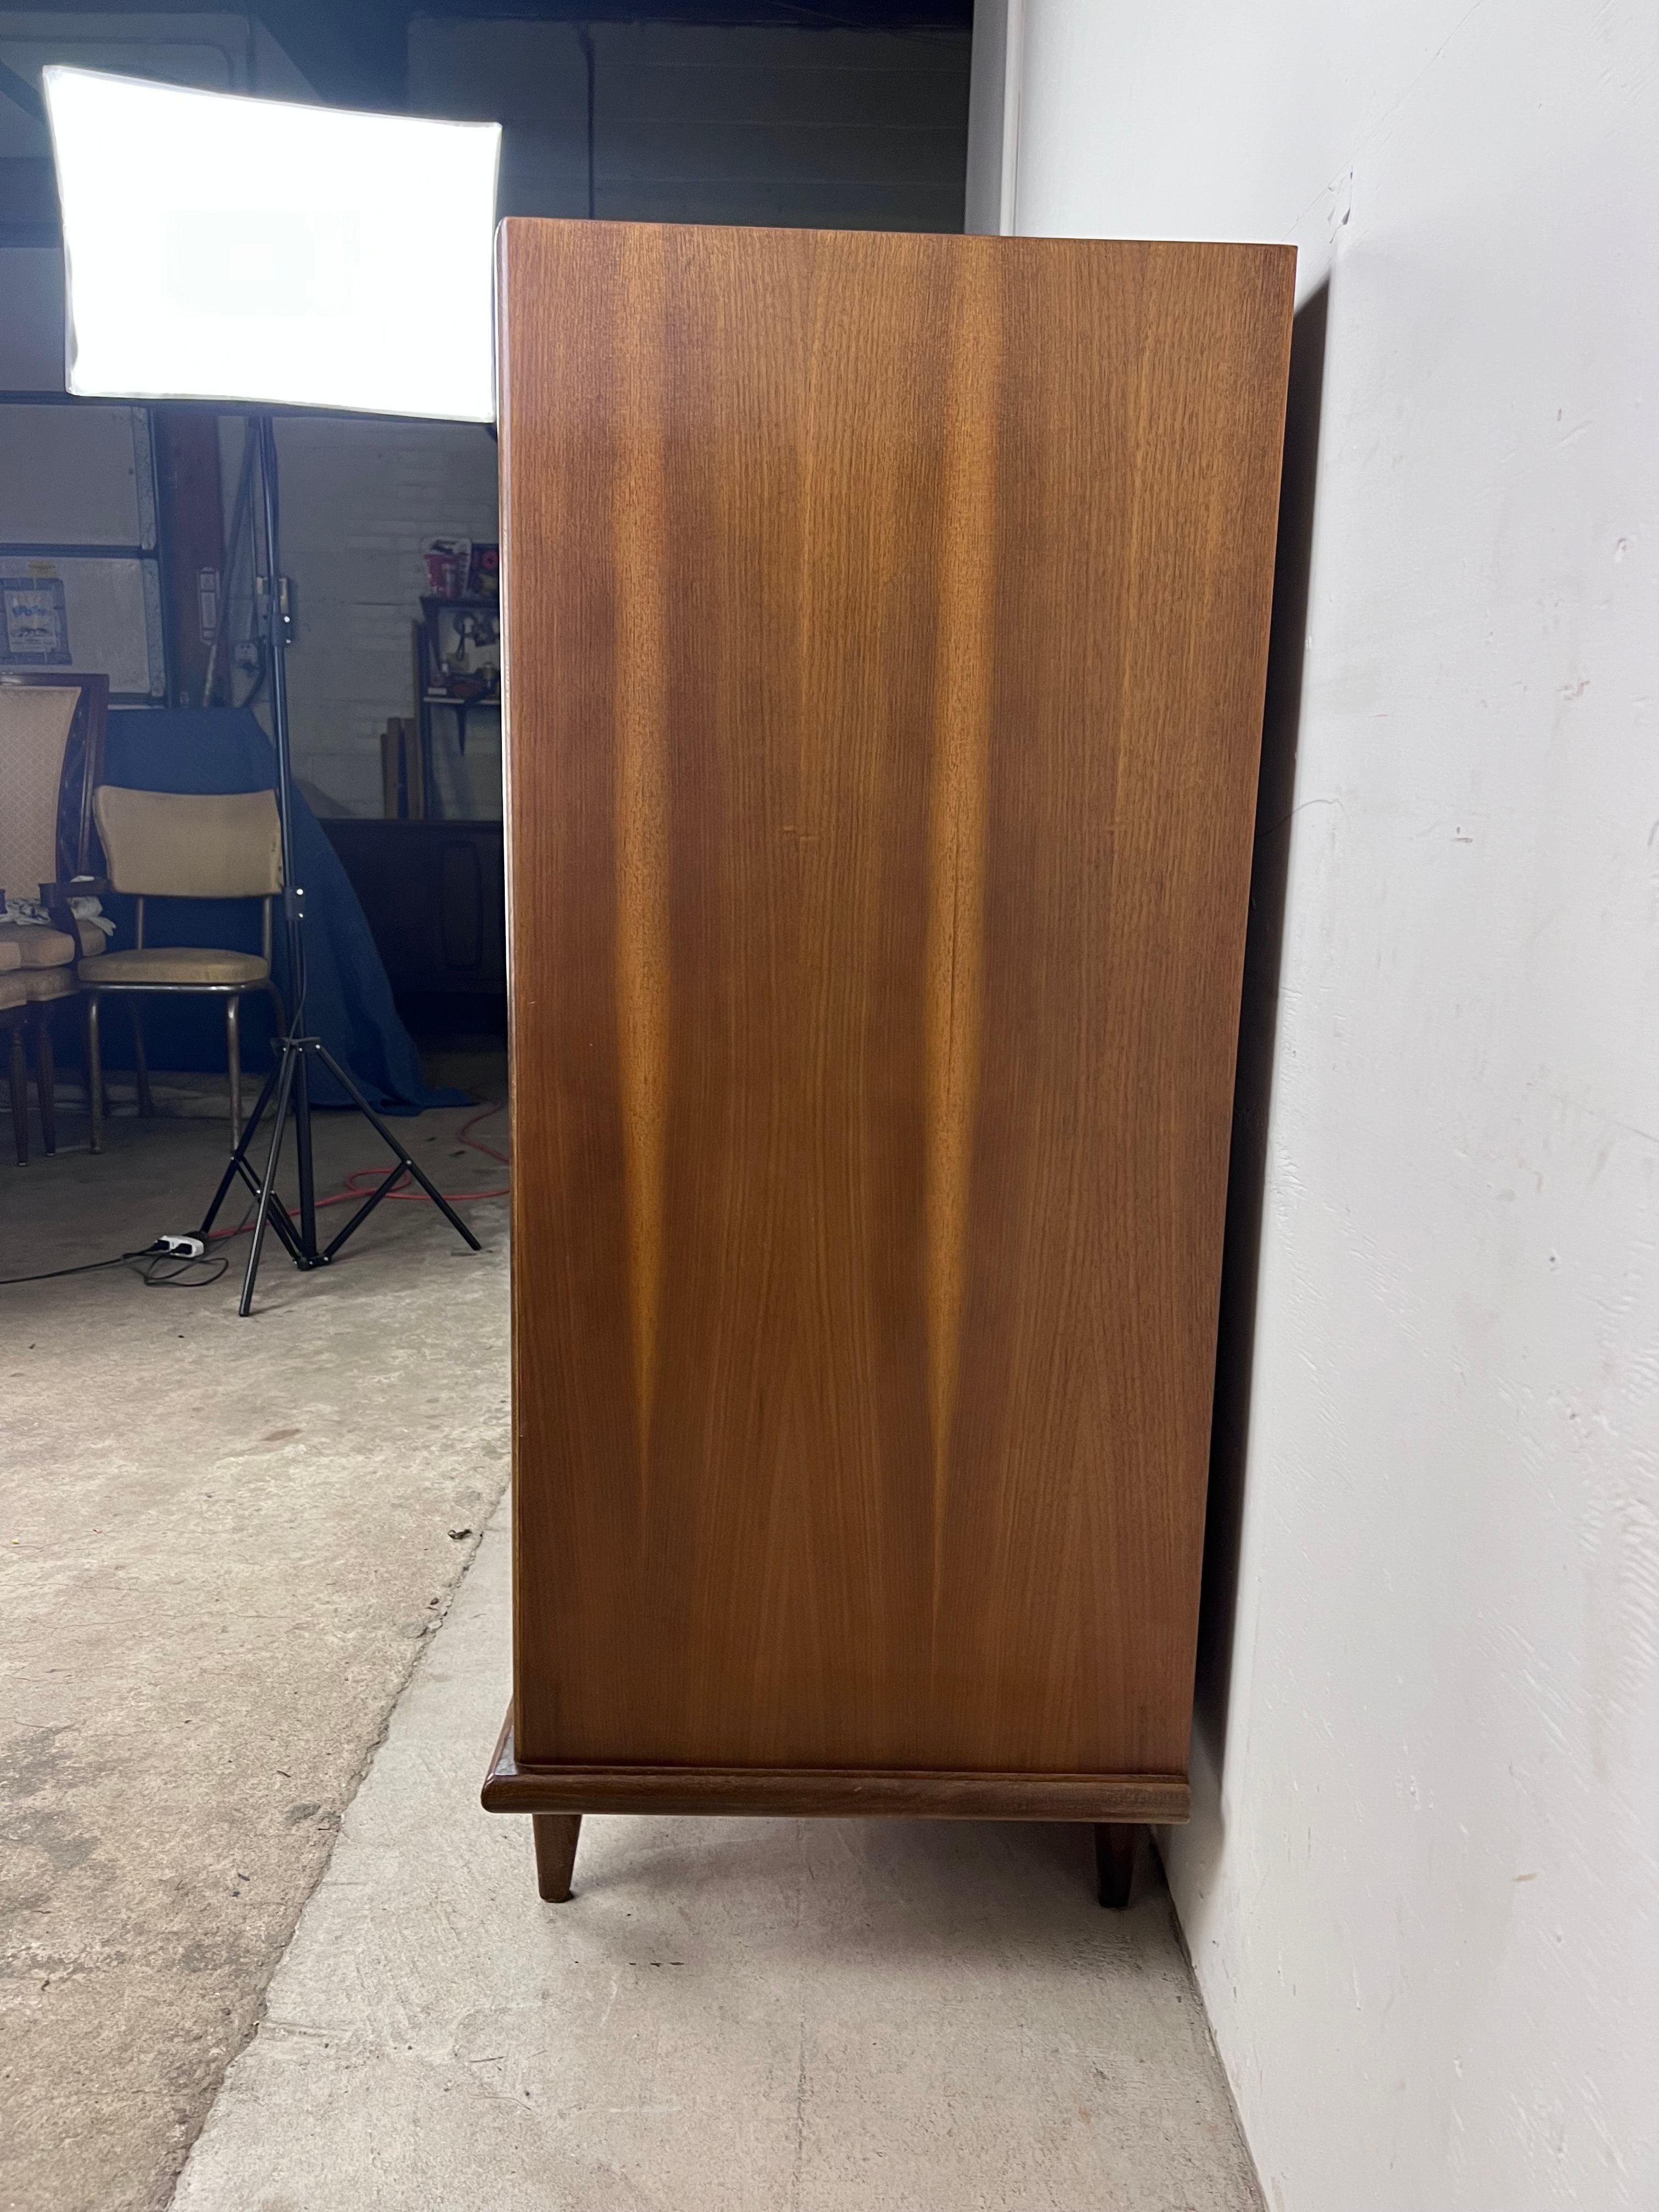 This Mid-Century Modern highboy dresser by American of Martinsville features hardwood construction, original walnut finish, five dovetailed drawers with unique beveled drawer fronts, atop tapered legs.??



Dimensions: 40 W 18.5 D 46.5 H. 

